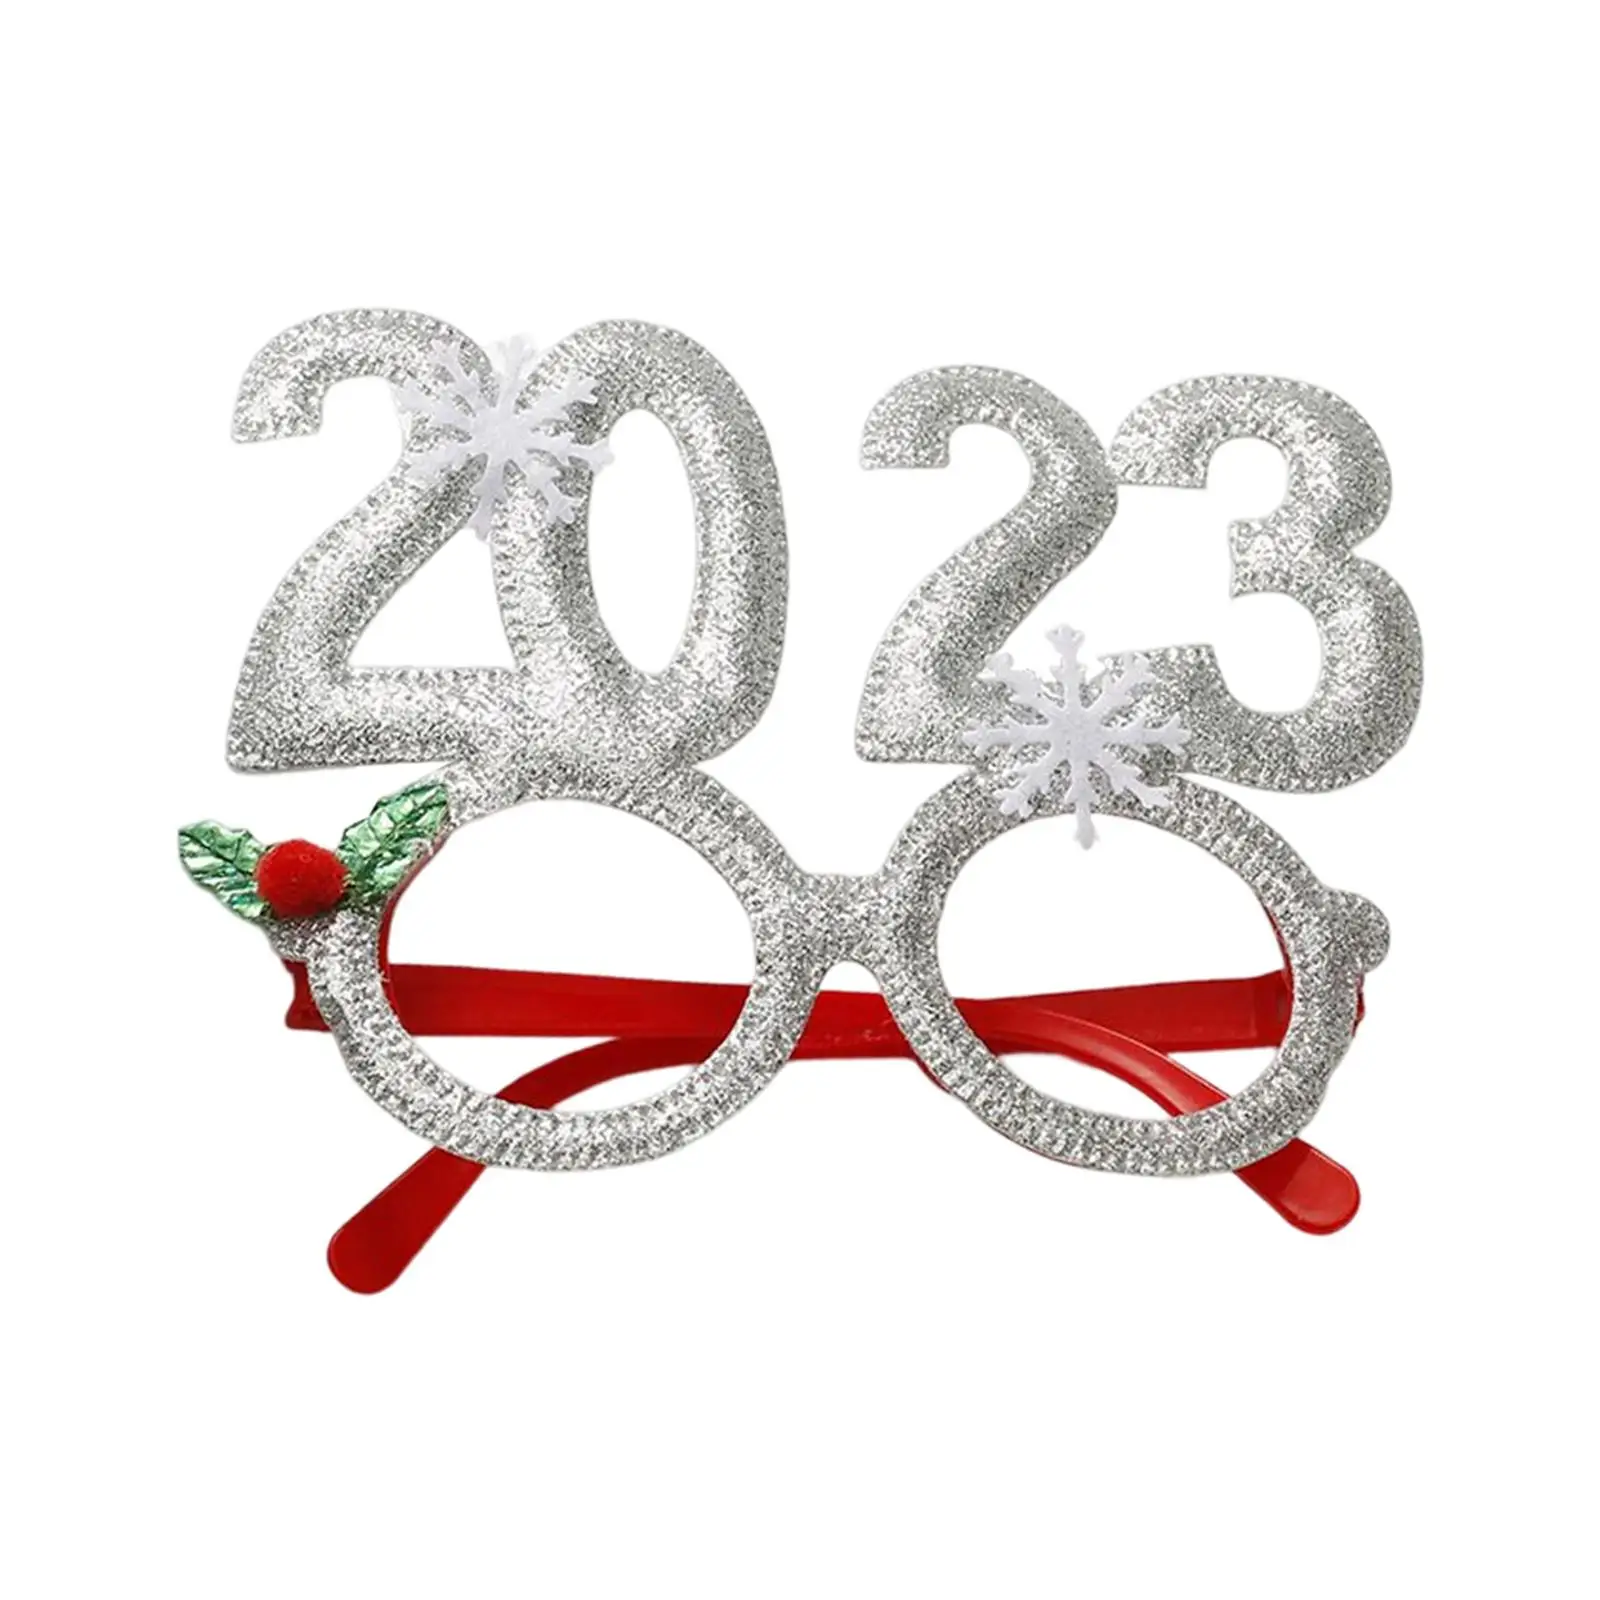 Christmas Glasses Photobooth Props Christmas Party Decor Party Favor cosplay glasses for Holiday Boys and Girls Kids Adults Gift